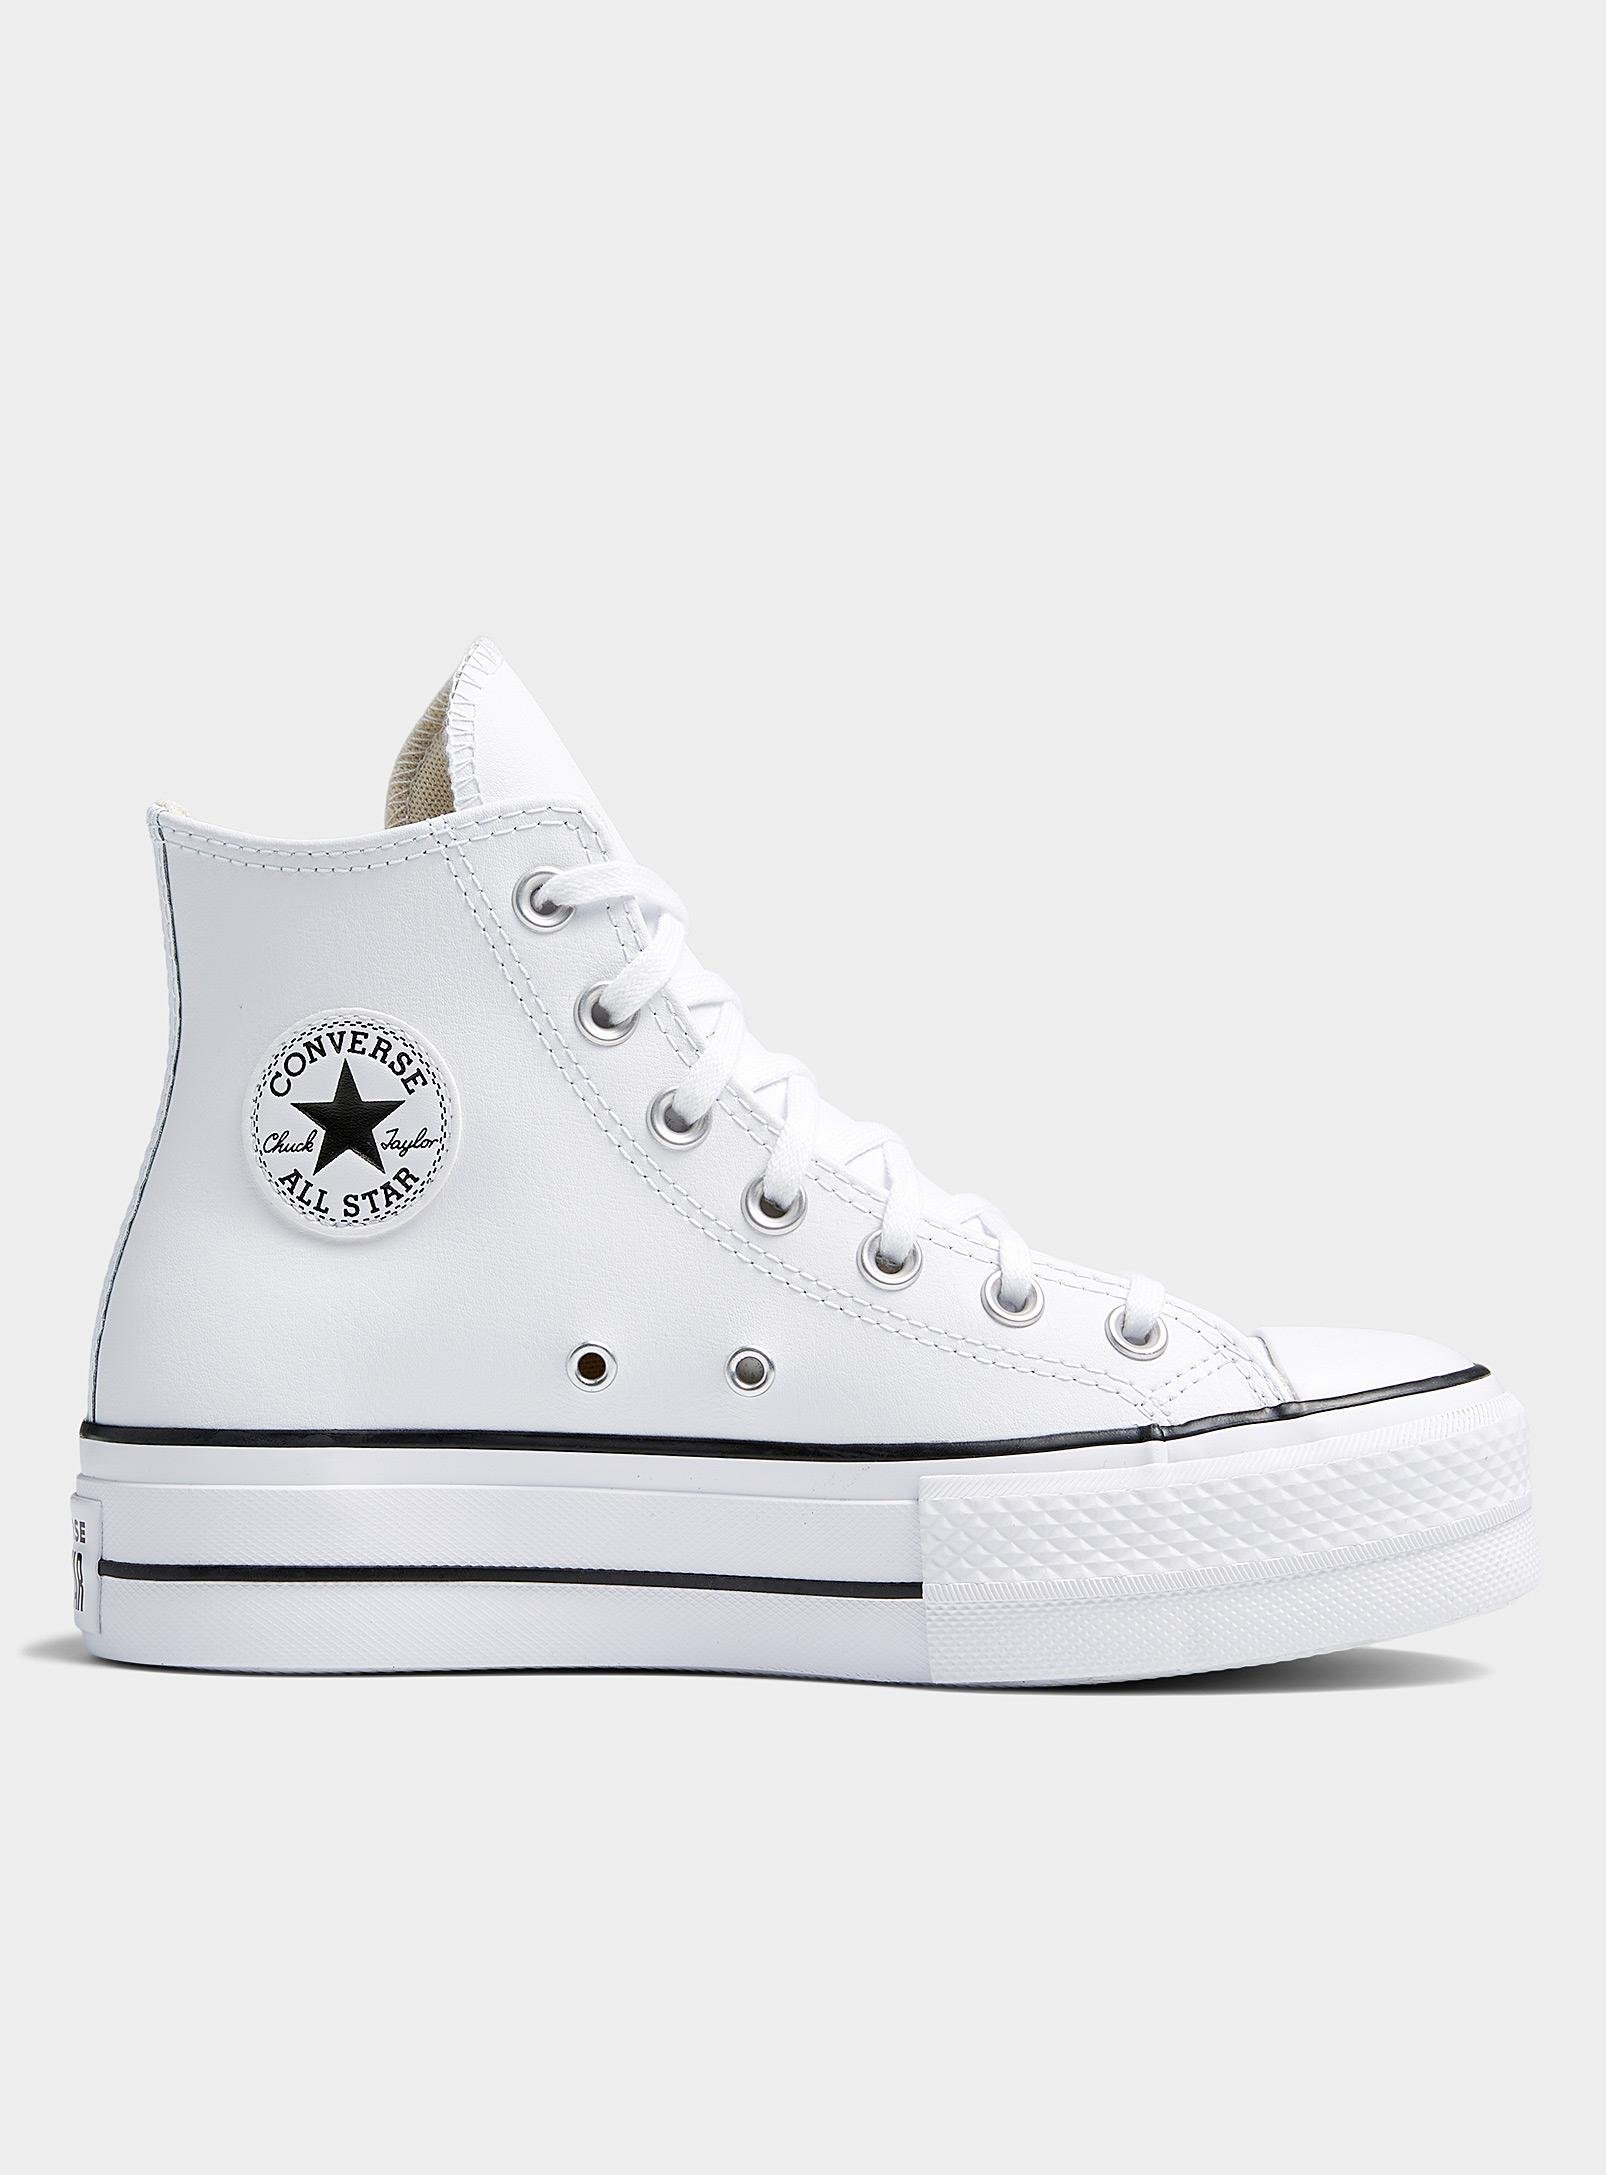 Converse Chuck All Star High Top White Leather Platform | Lyst